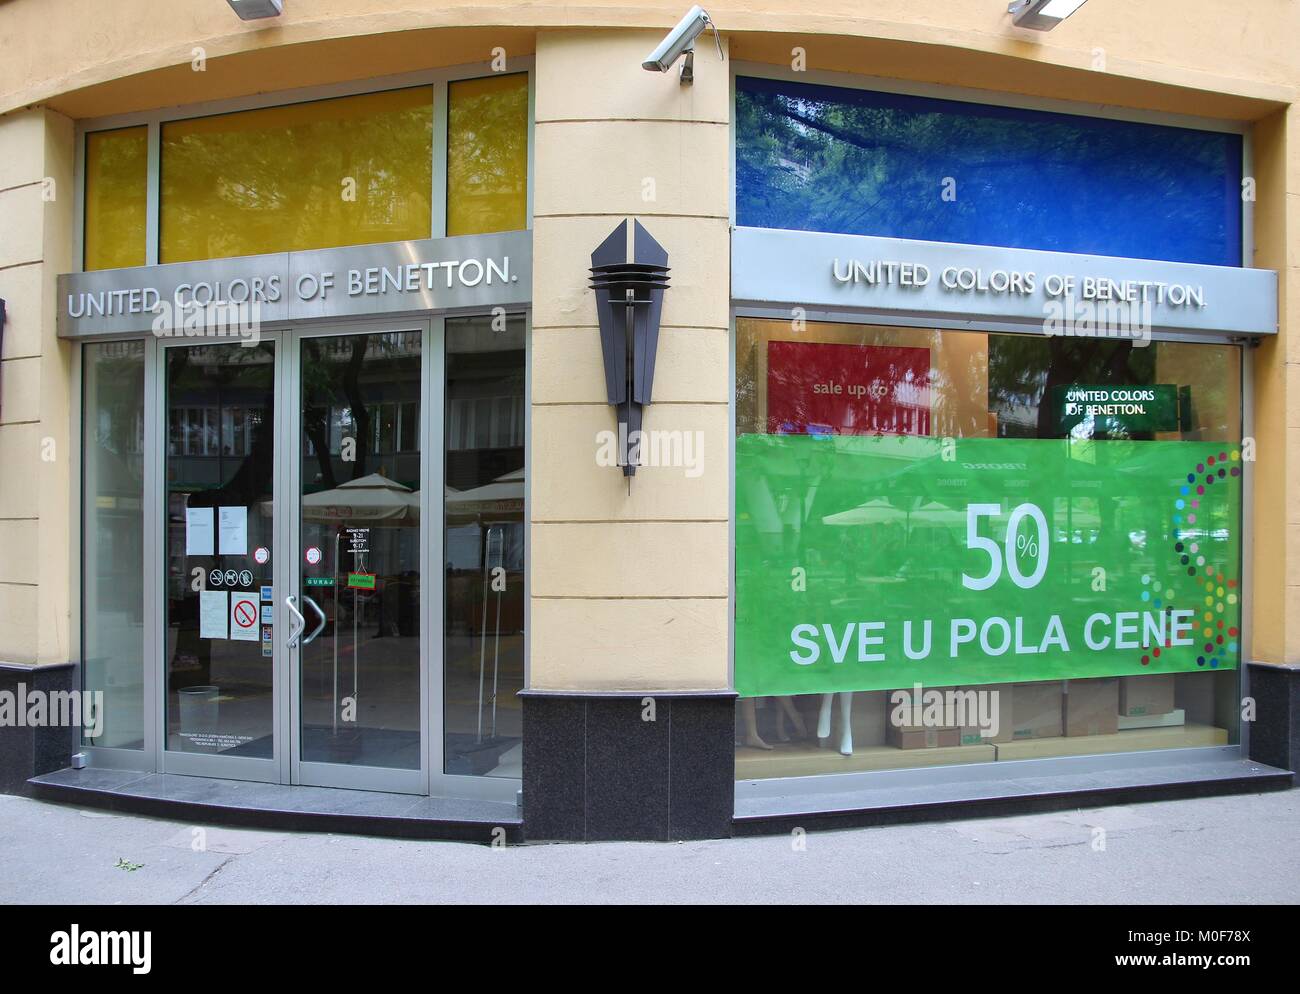 SUBOTICA, SERBIA - AUGUST 12: United Colors of Benetton store on August 12,  2012 in Subotica, Serbia. Benetton is a global luxury fashion brand with 6  Stock Photo - Alamy